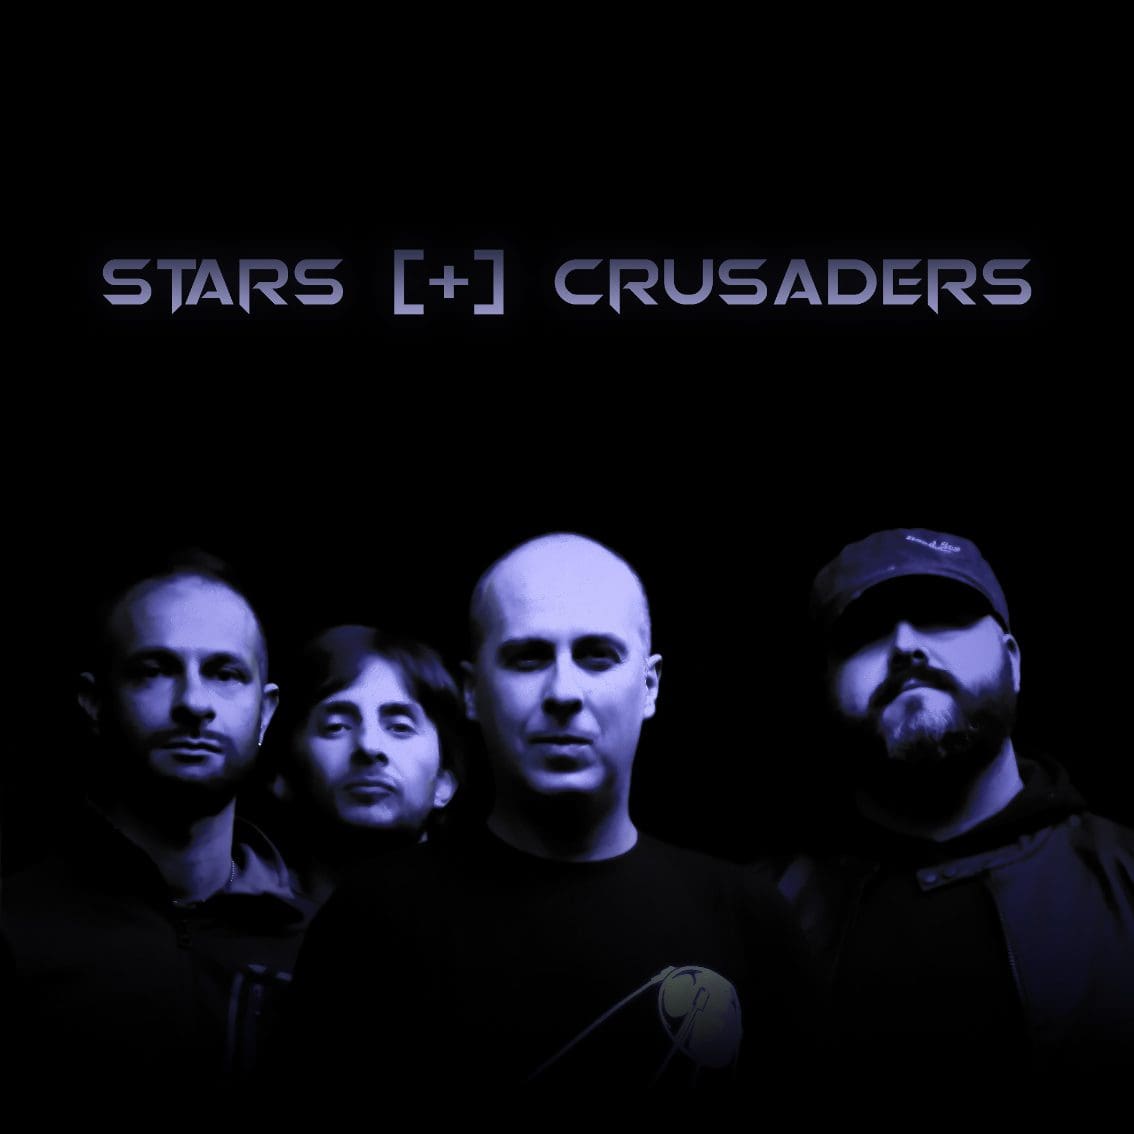 Stars Crusaders joins SkyQode family of artists - new single and videoclip in the making